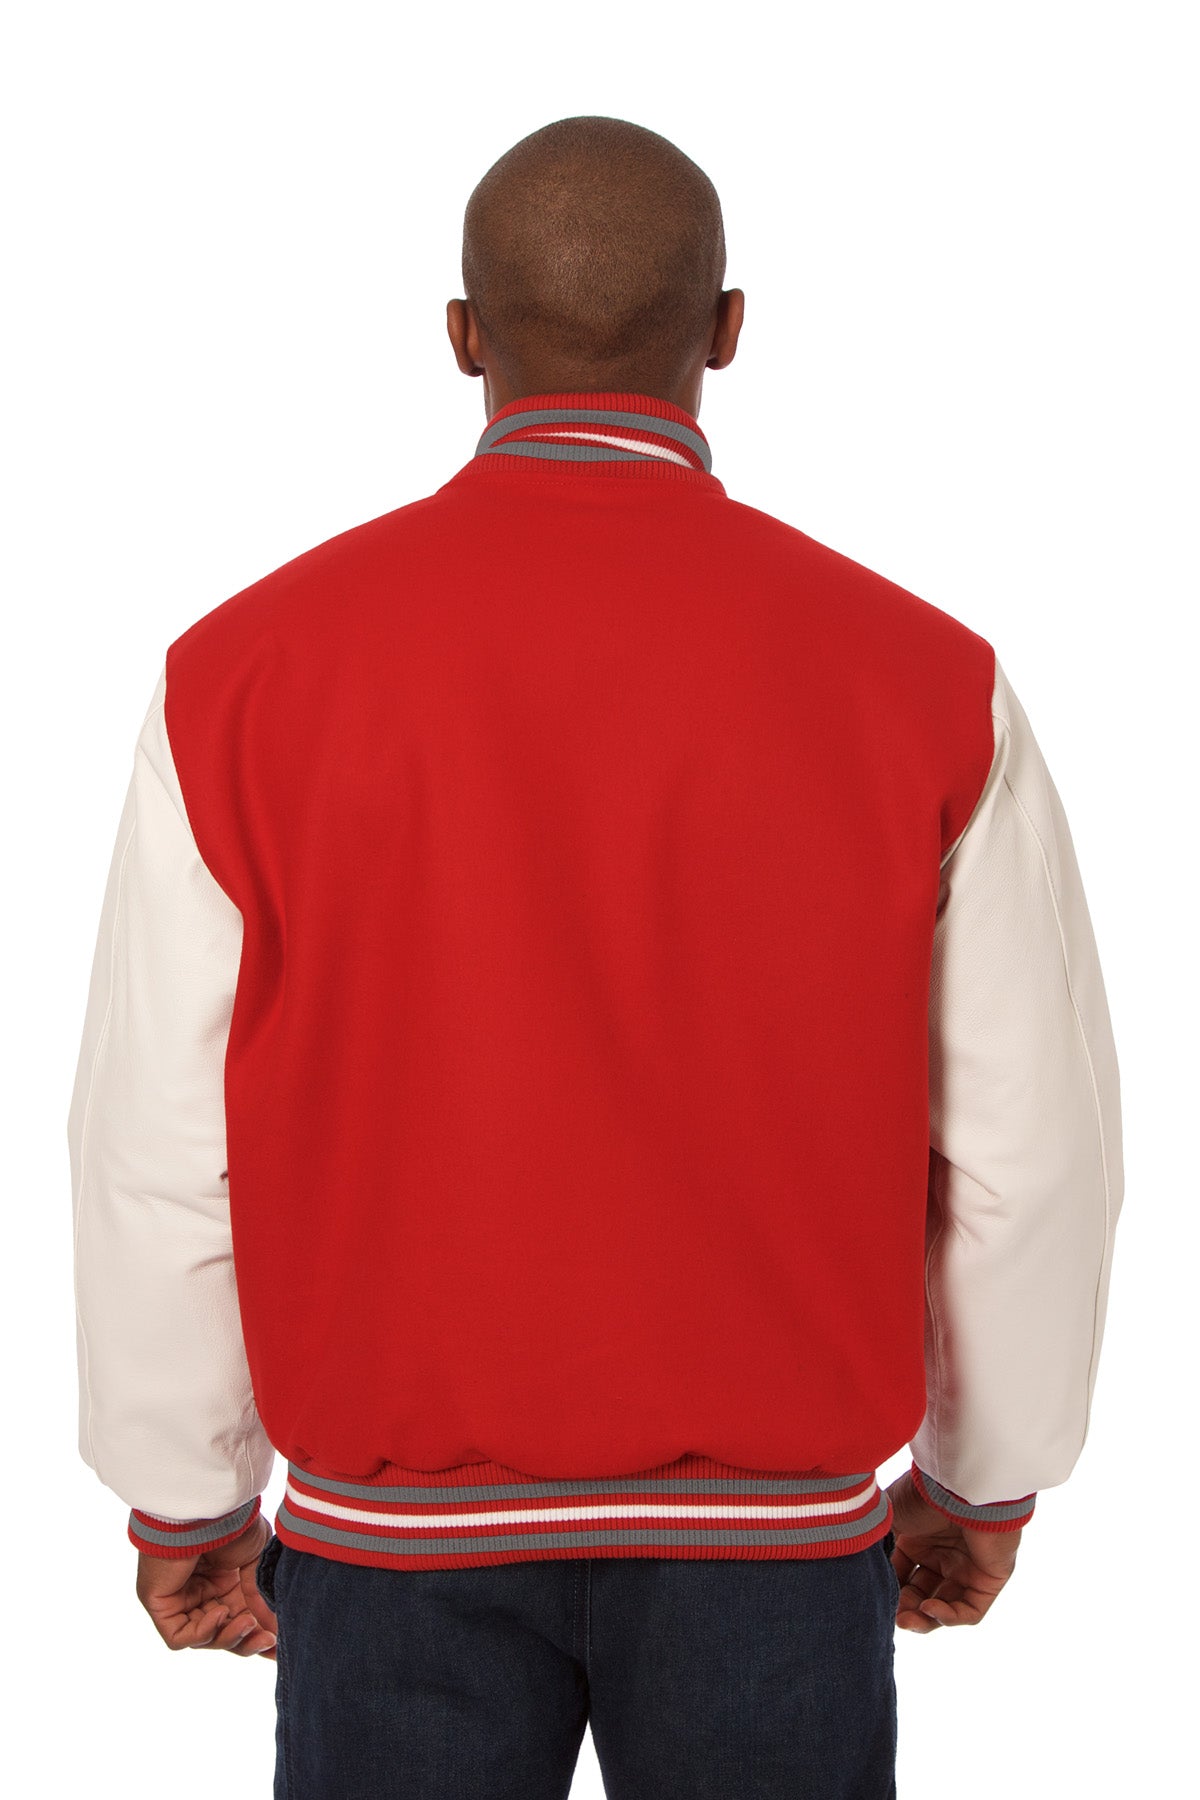 Wool and Leather Varsity Jacket in Red and White